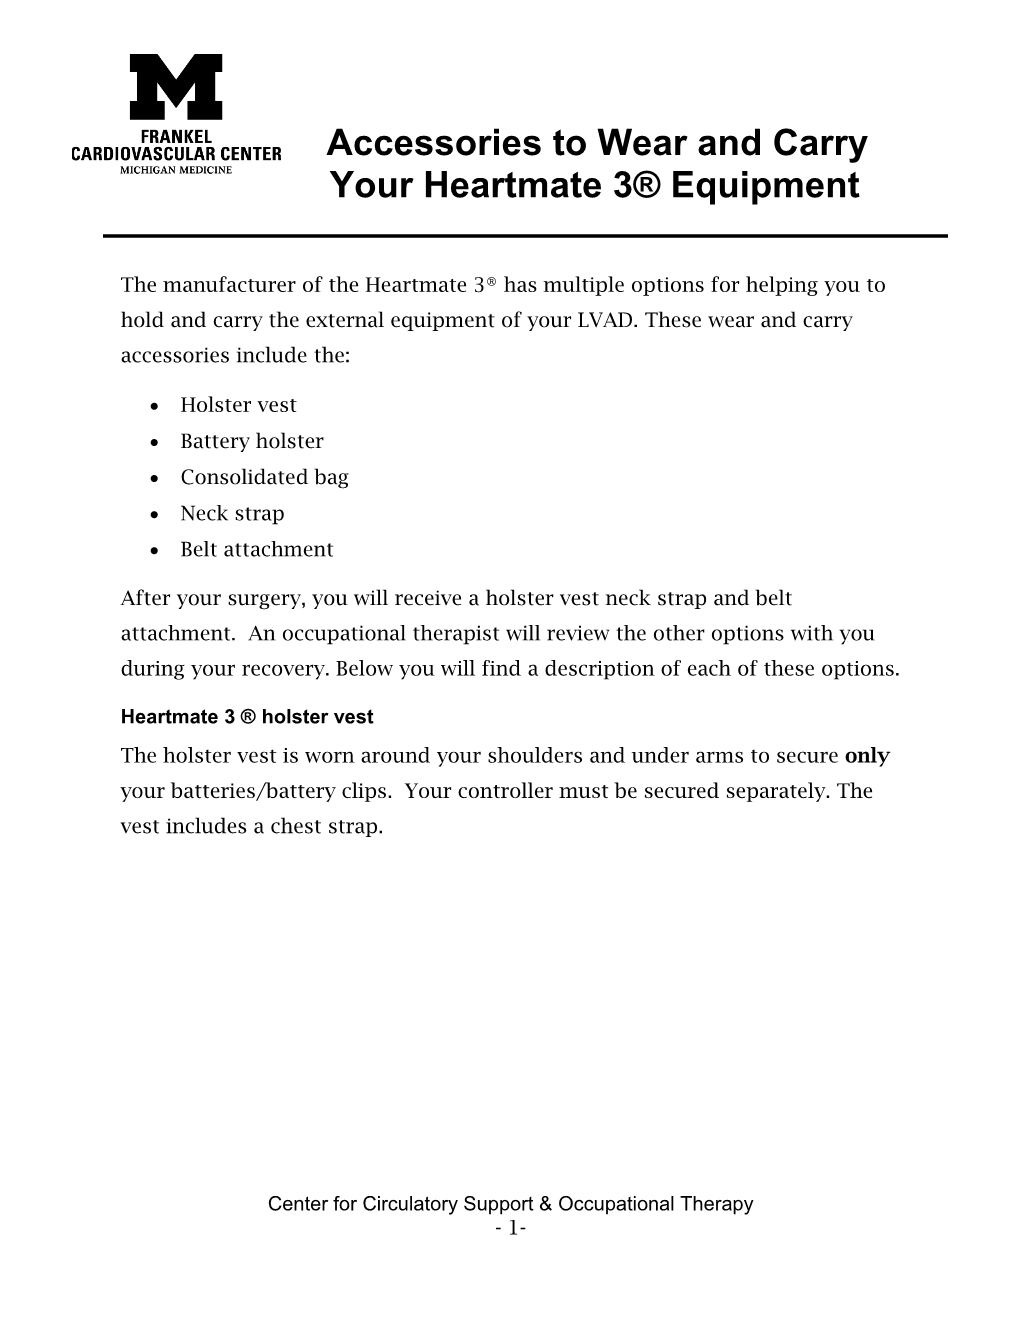 Accessories to Wear and Carry Your Heartmate 3® Equipment